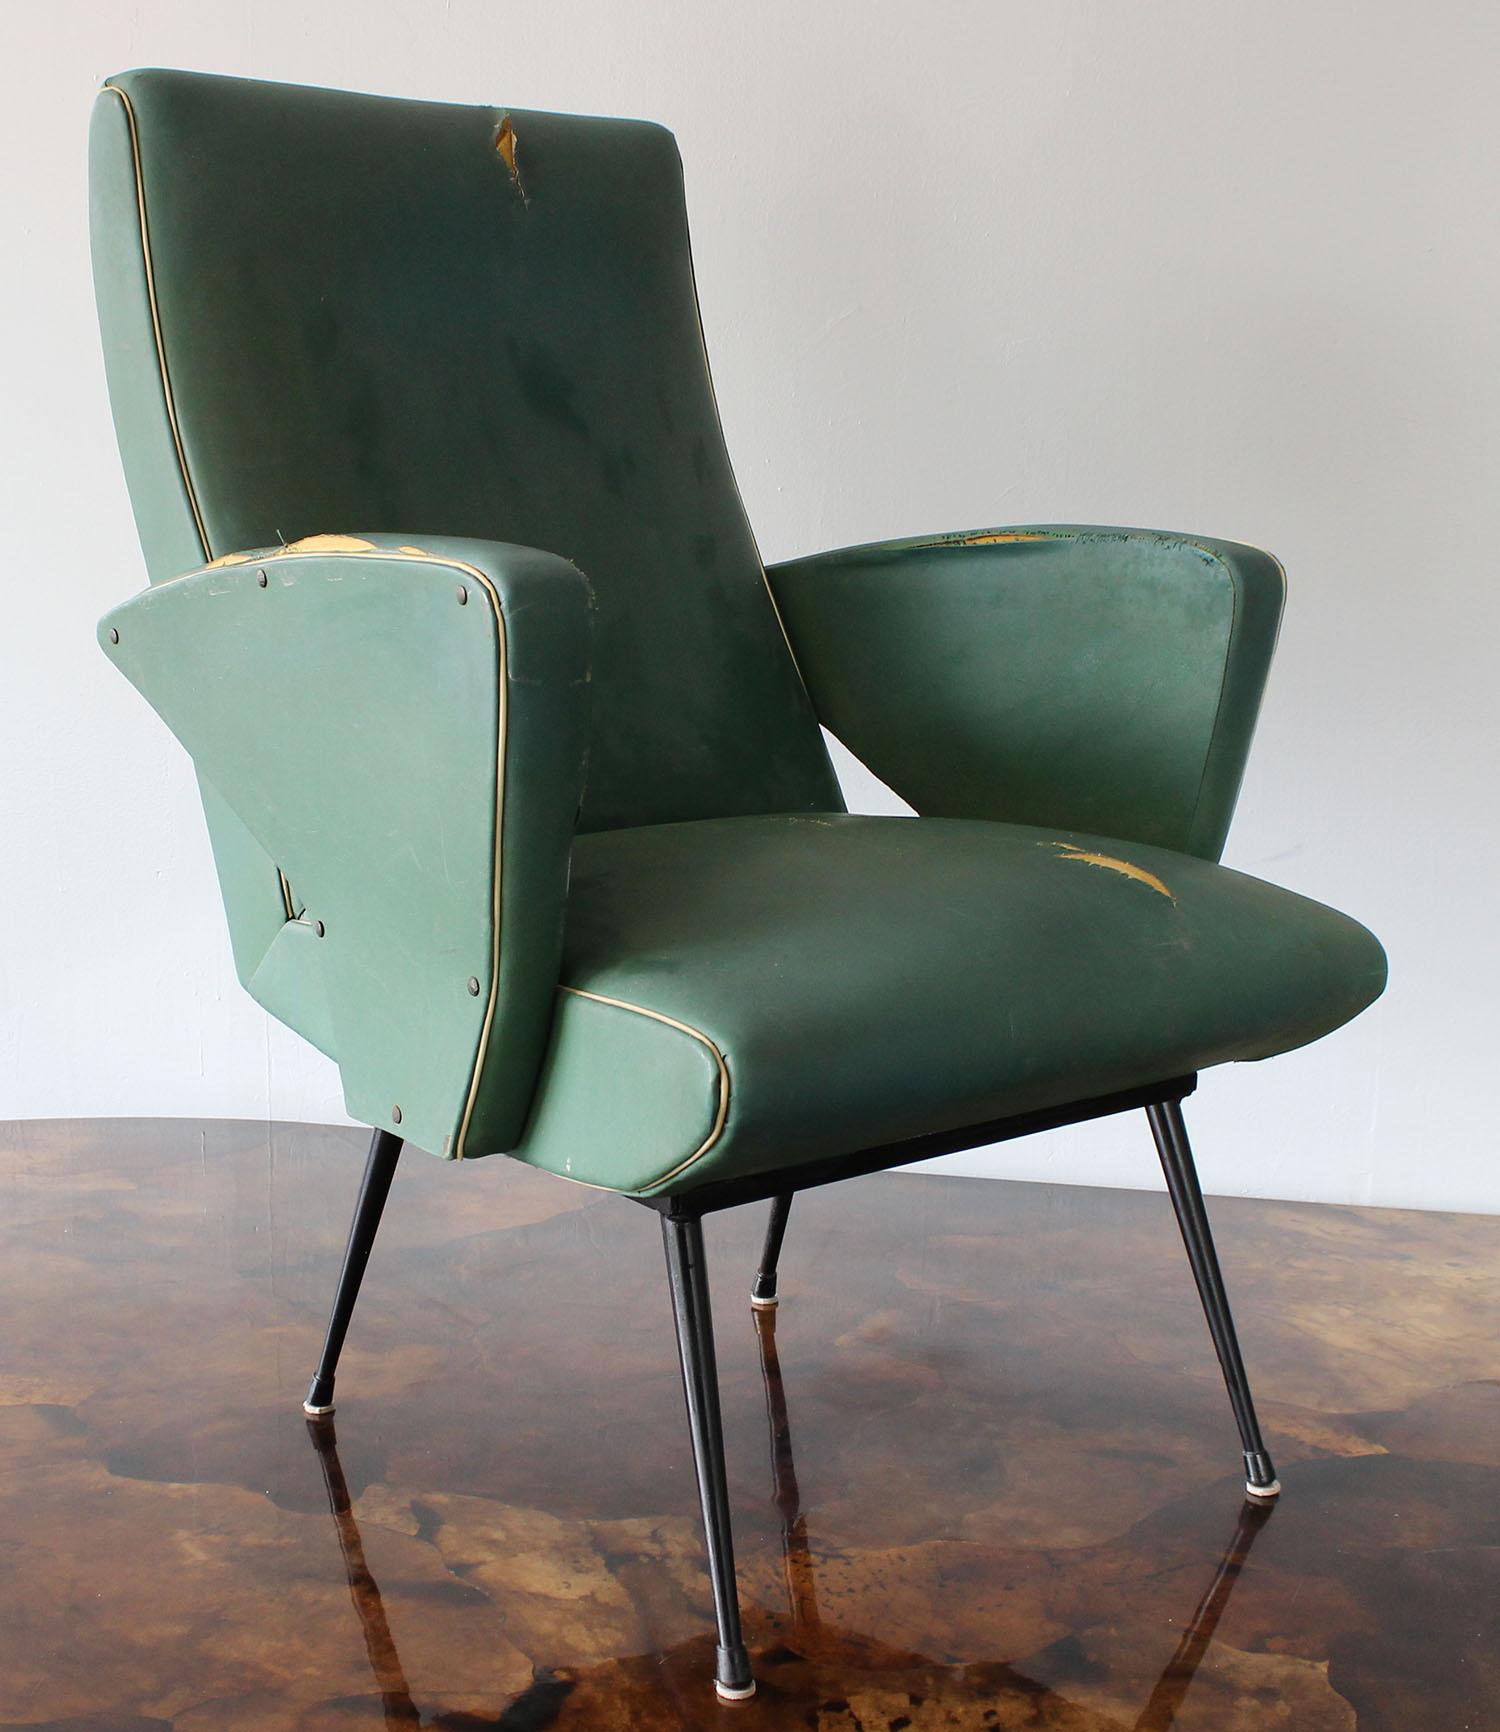 A midcentury Italian armchair with boomerang arm detail. In original faux leather upholstery.
Arm height 22 inches.